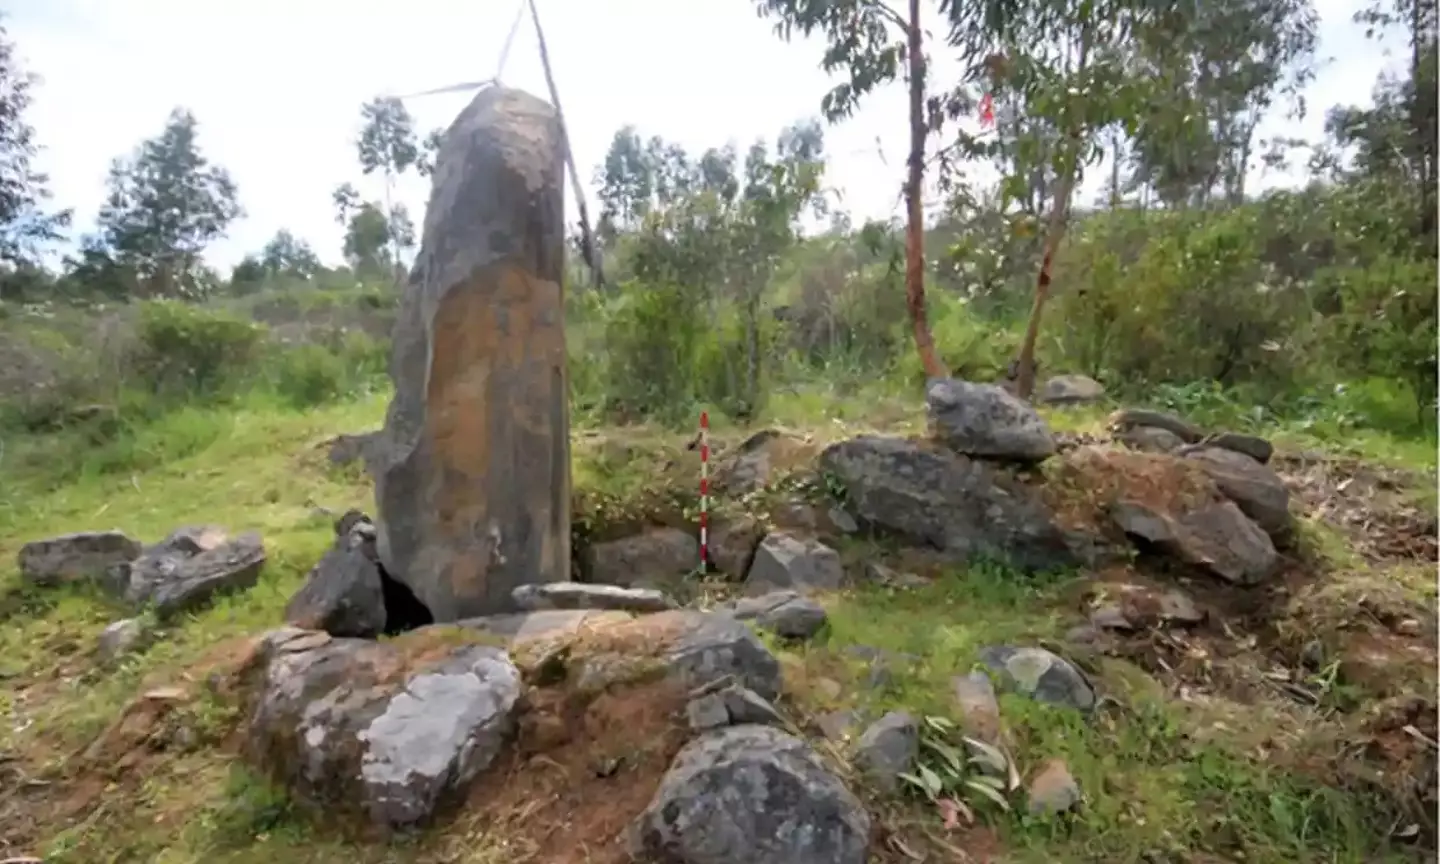 More than 500 standing stones have been found at the La Torre-La Janera site in Spain.